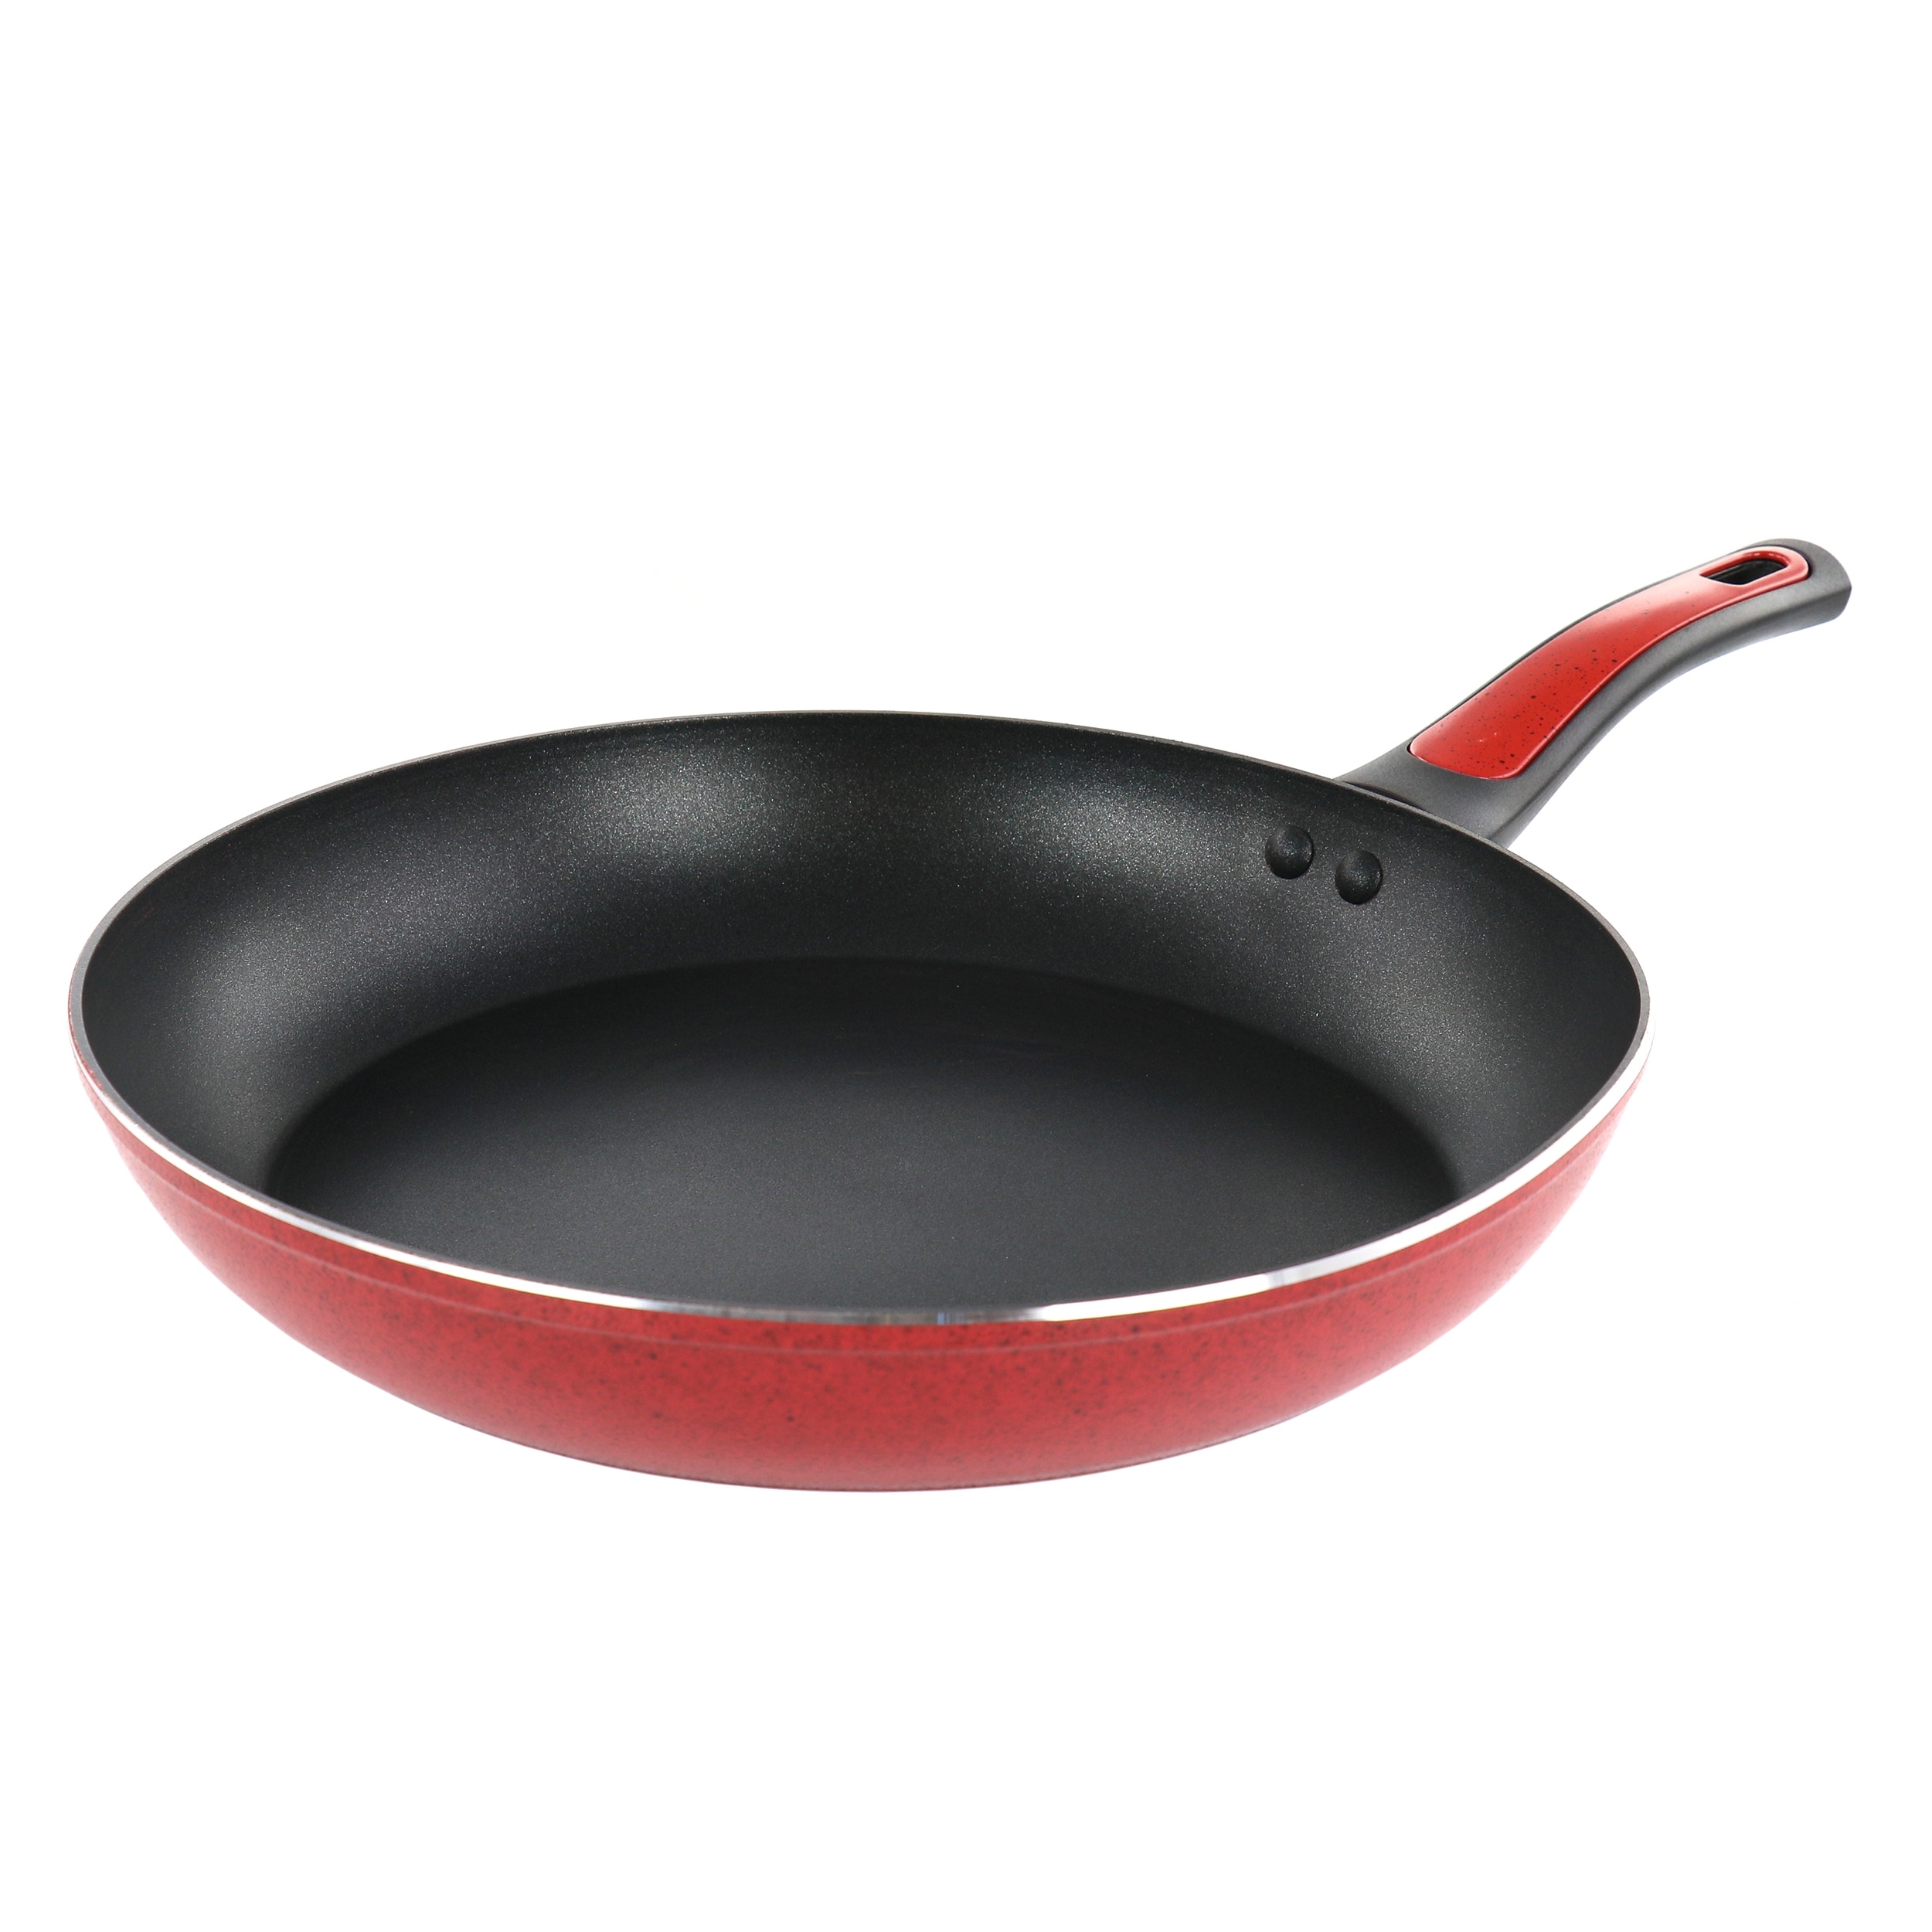 https://ak1.ostkcdn.com/images/products/is/images/direct/823a9aaa6a930f8fb0fbb2198108ef33c509938d/Oster-Claybon-12-Inch-Nonstick-Frying-Pan-in-Speckled-Red.jpg